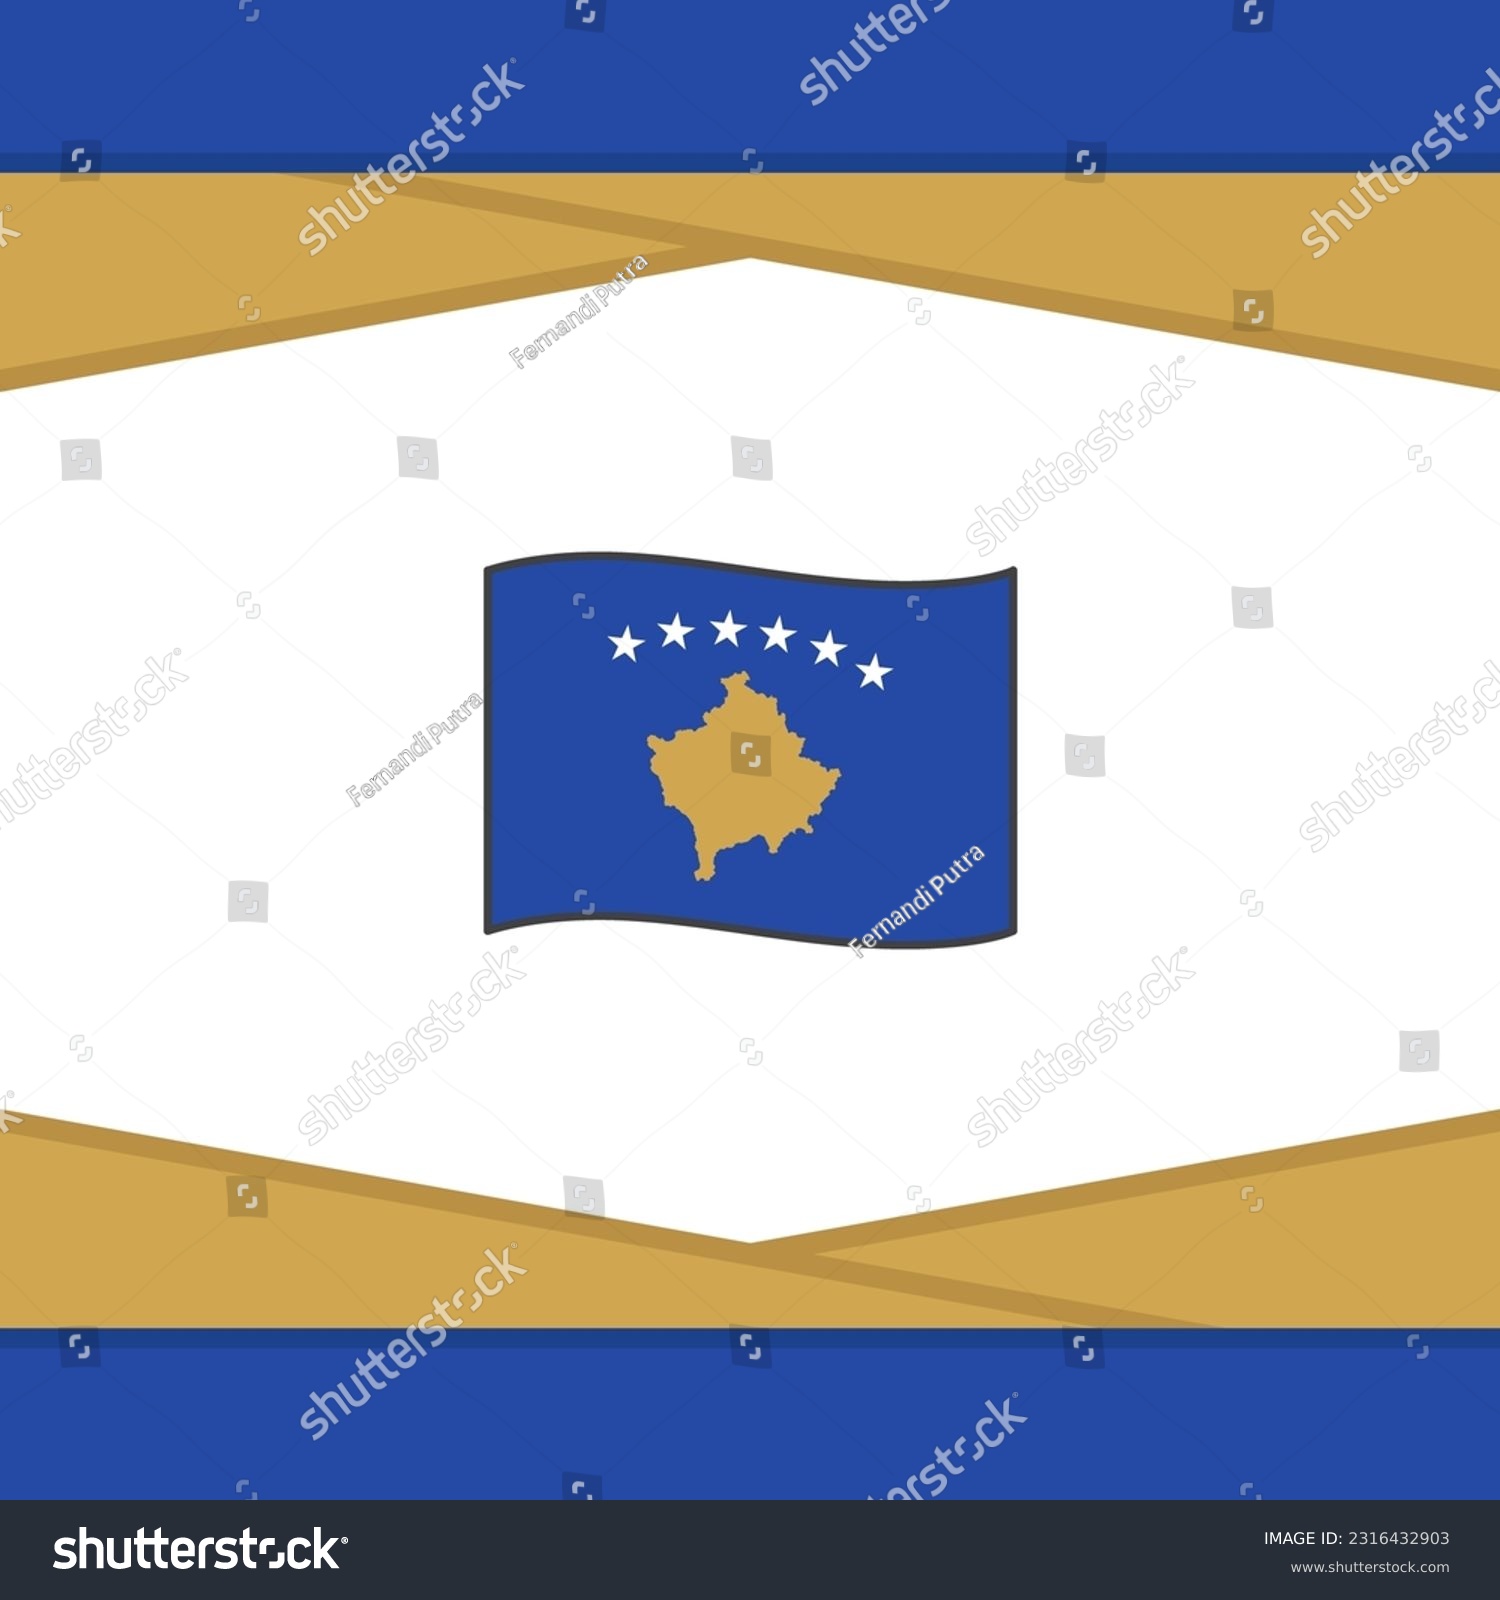 Kosovo flag abstract background design template stock vector royalty free